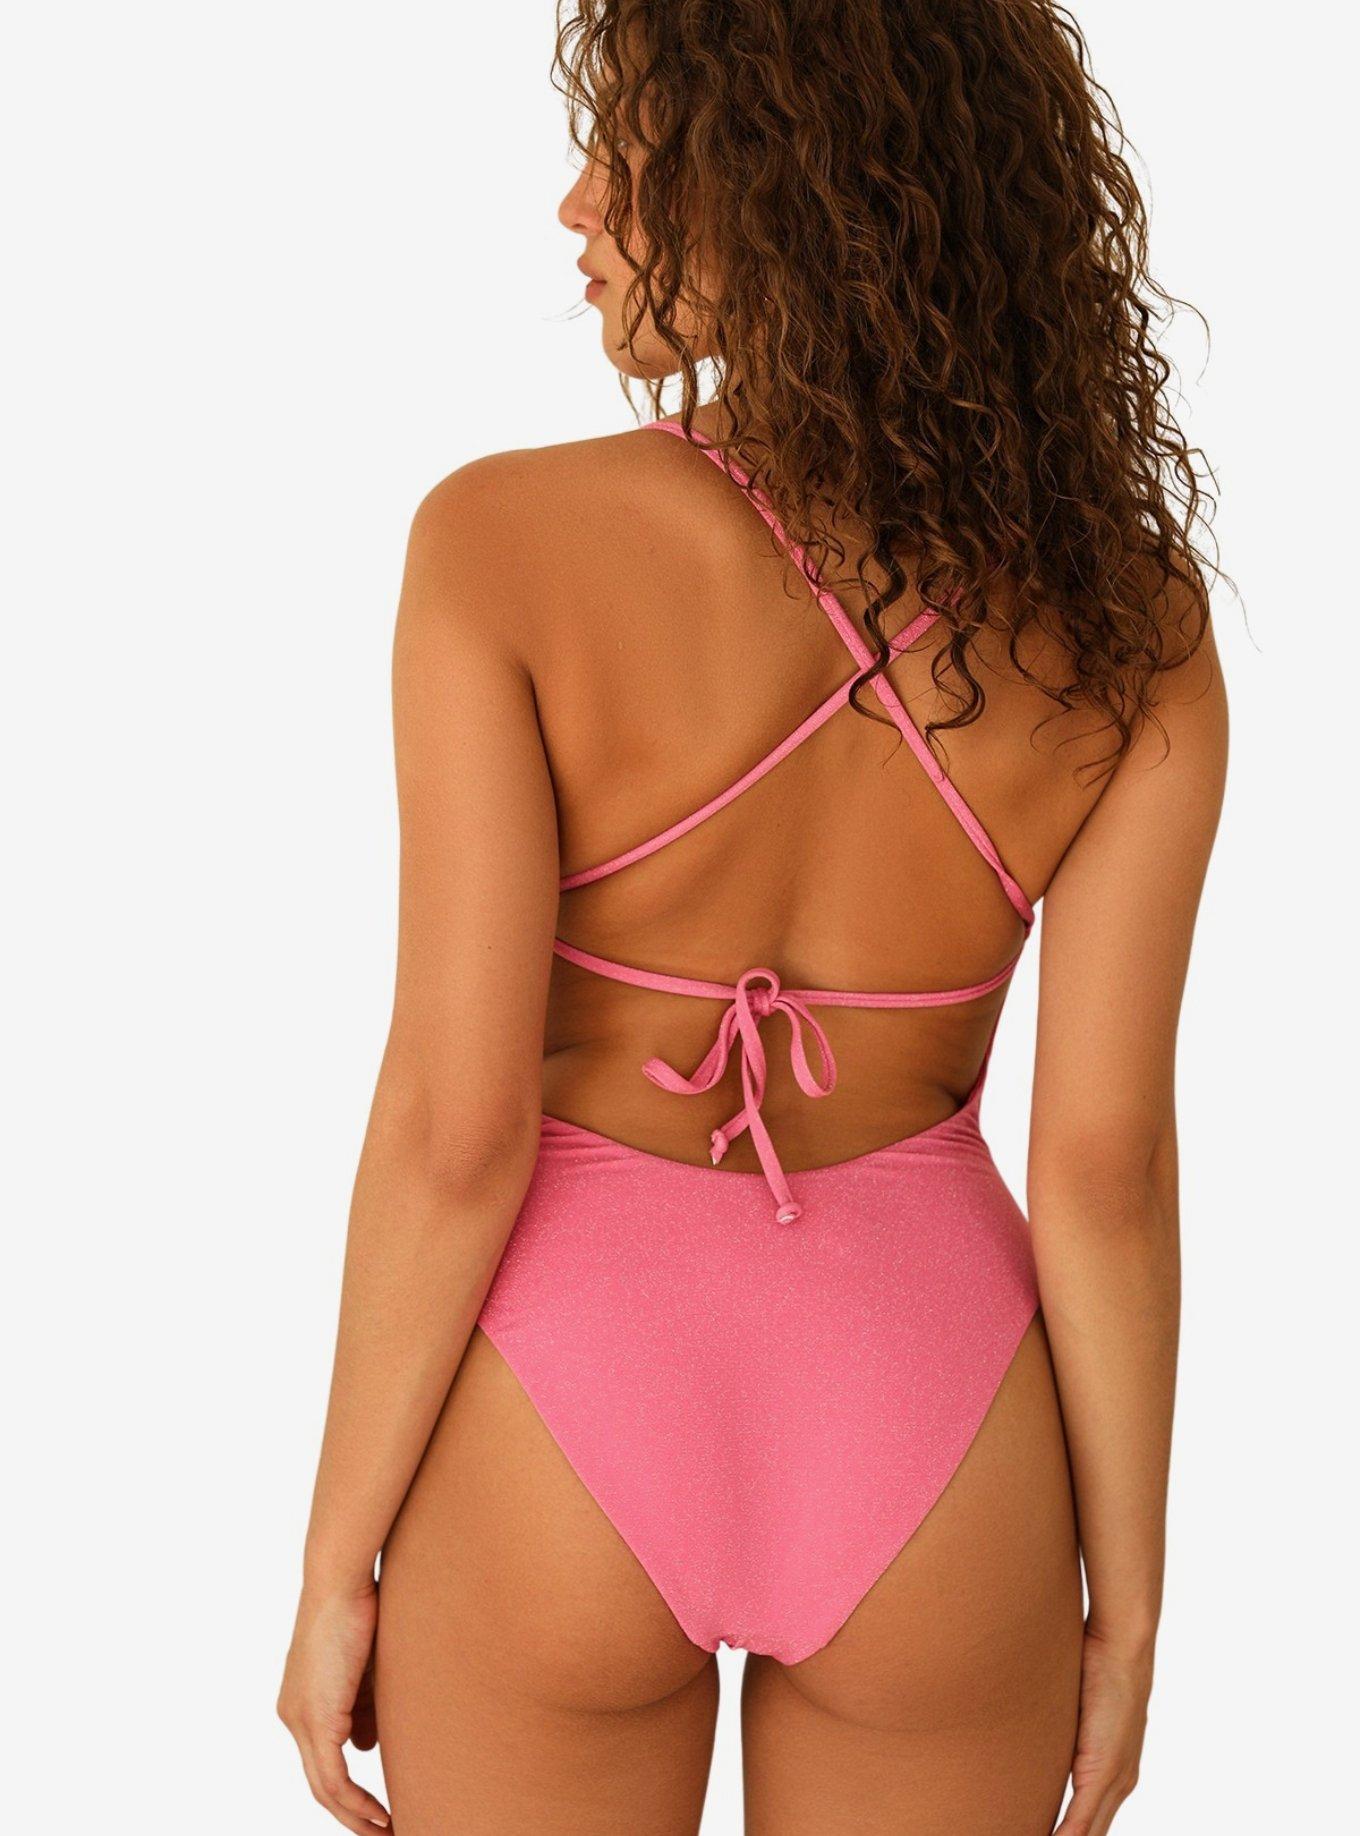 Dippin' Daisy's Gwen One Piece Candy Sparkle, PINK, alternate